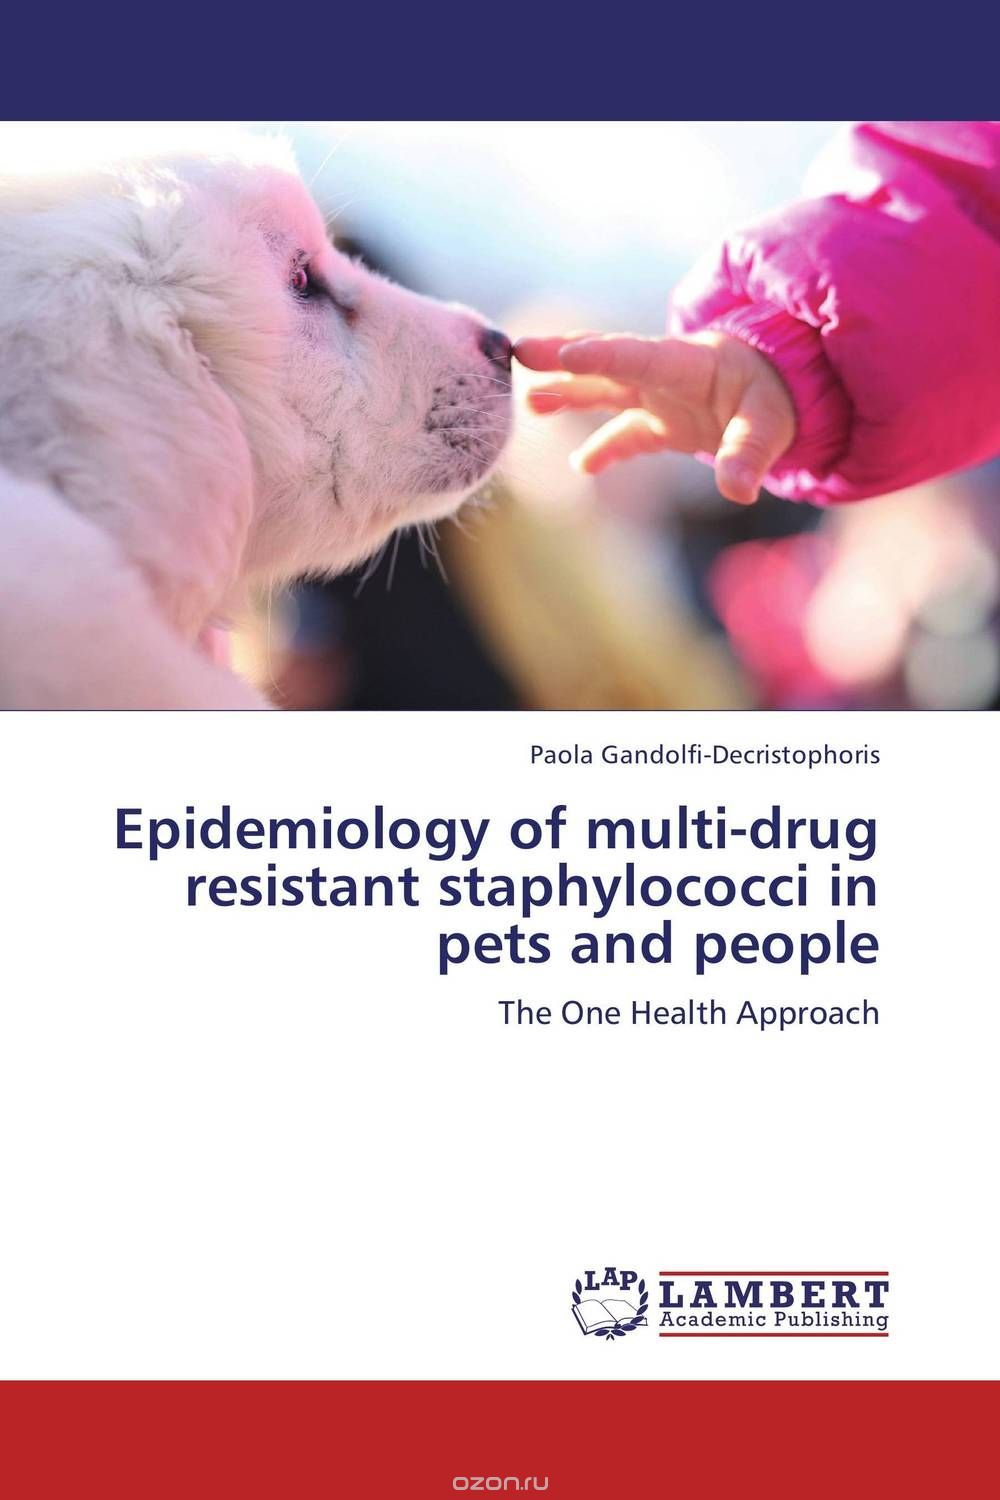 Скачать книгу "Epidemiology of multi-drug resistant staphylococci in pets and people"